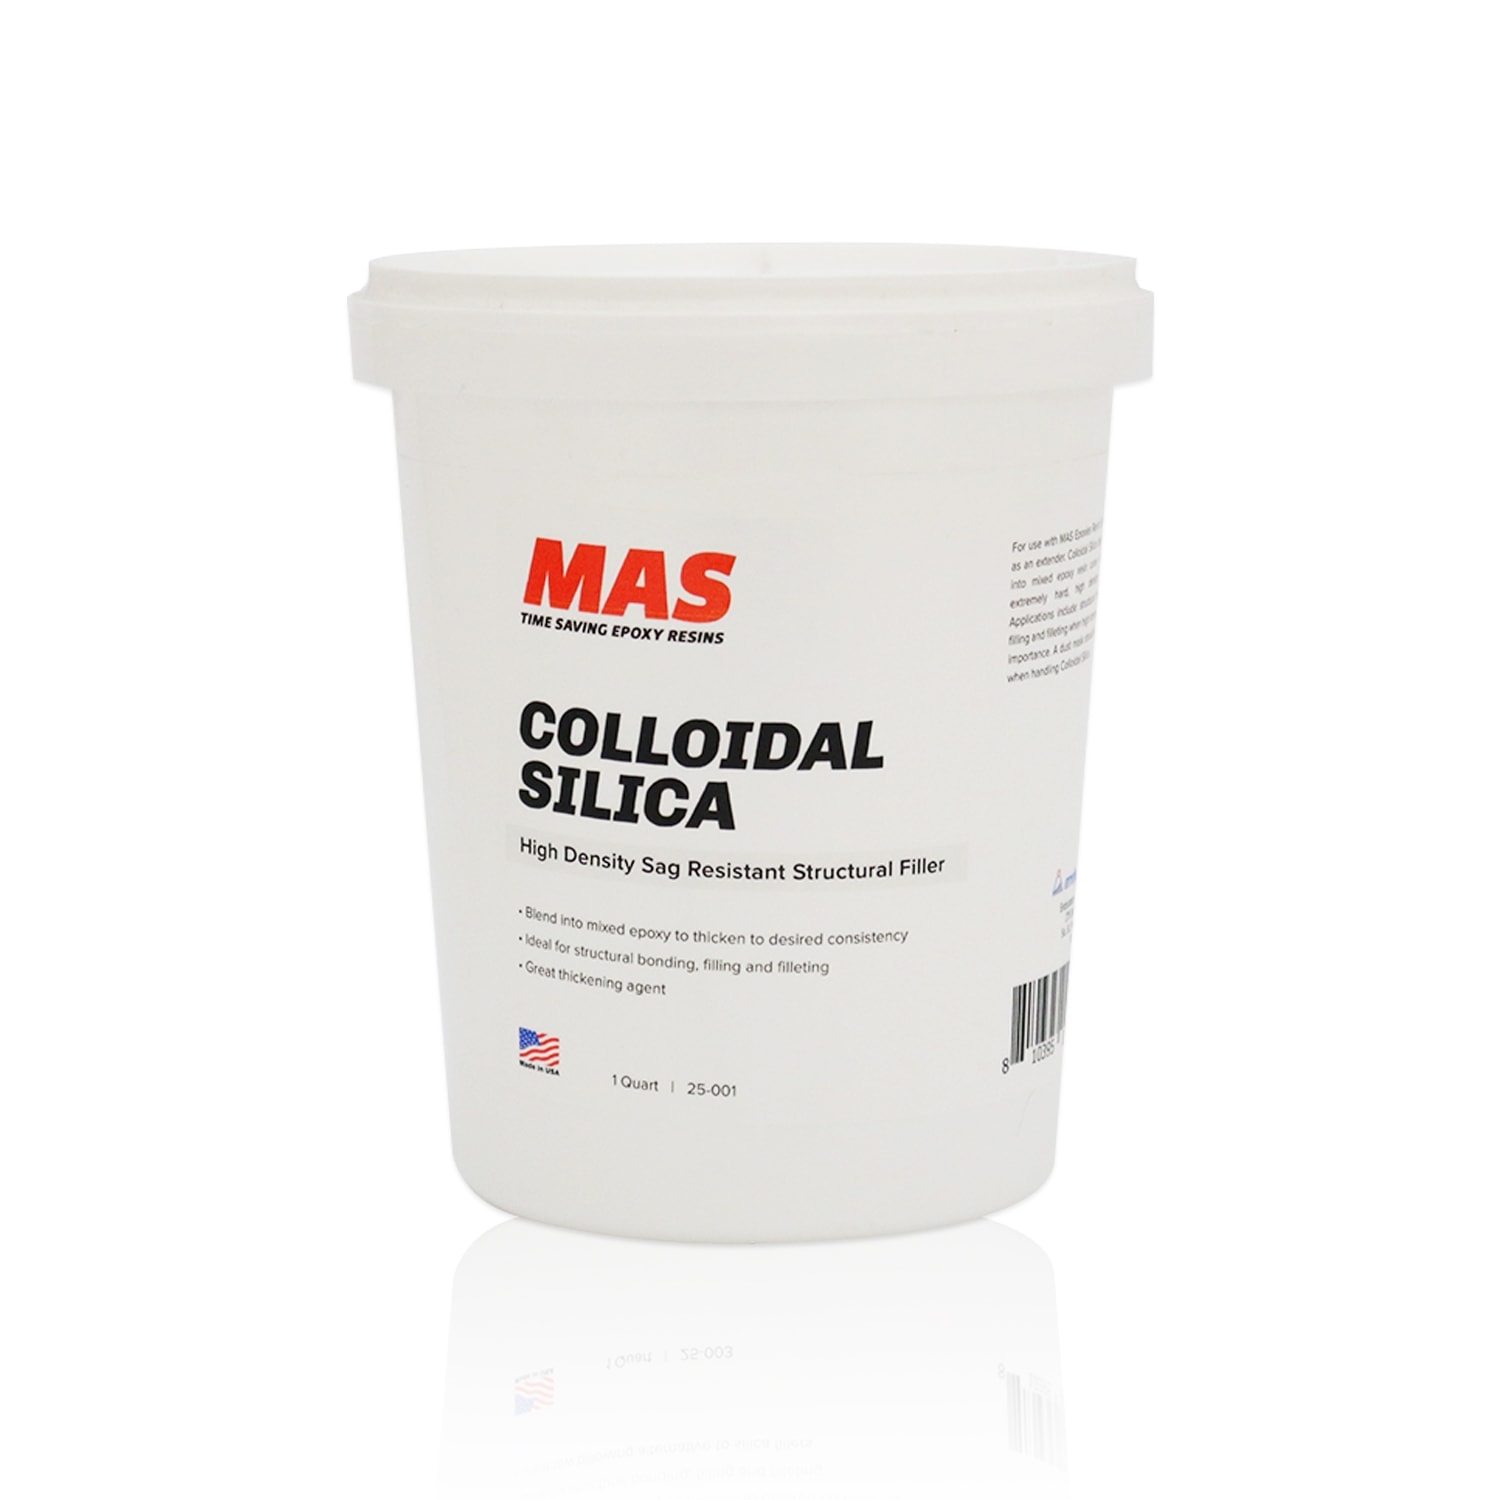 Colloidal Silica Questions & Answers